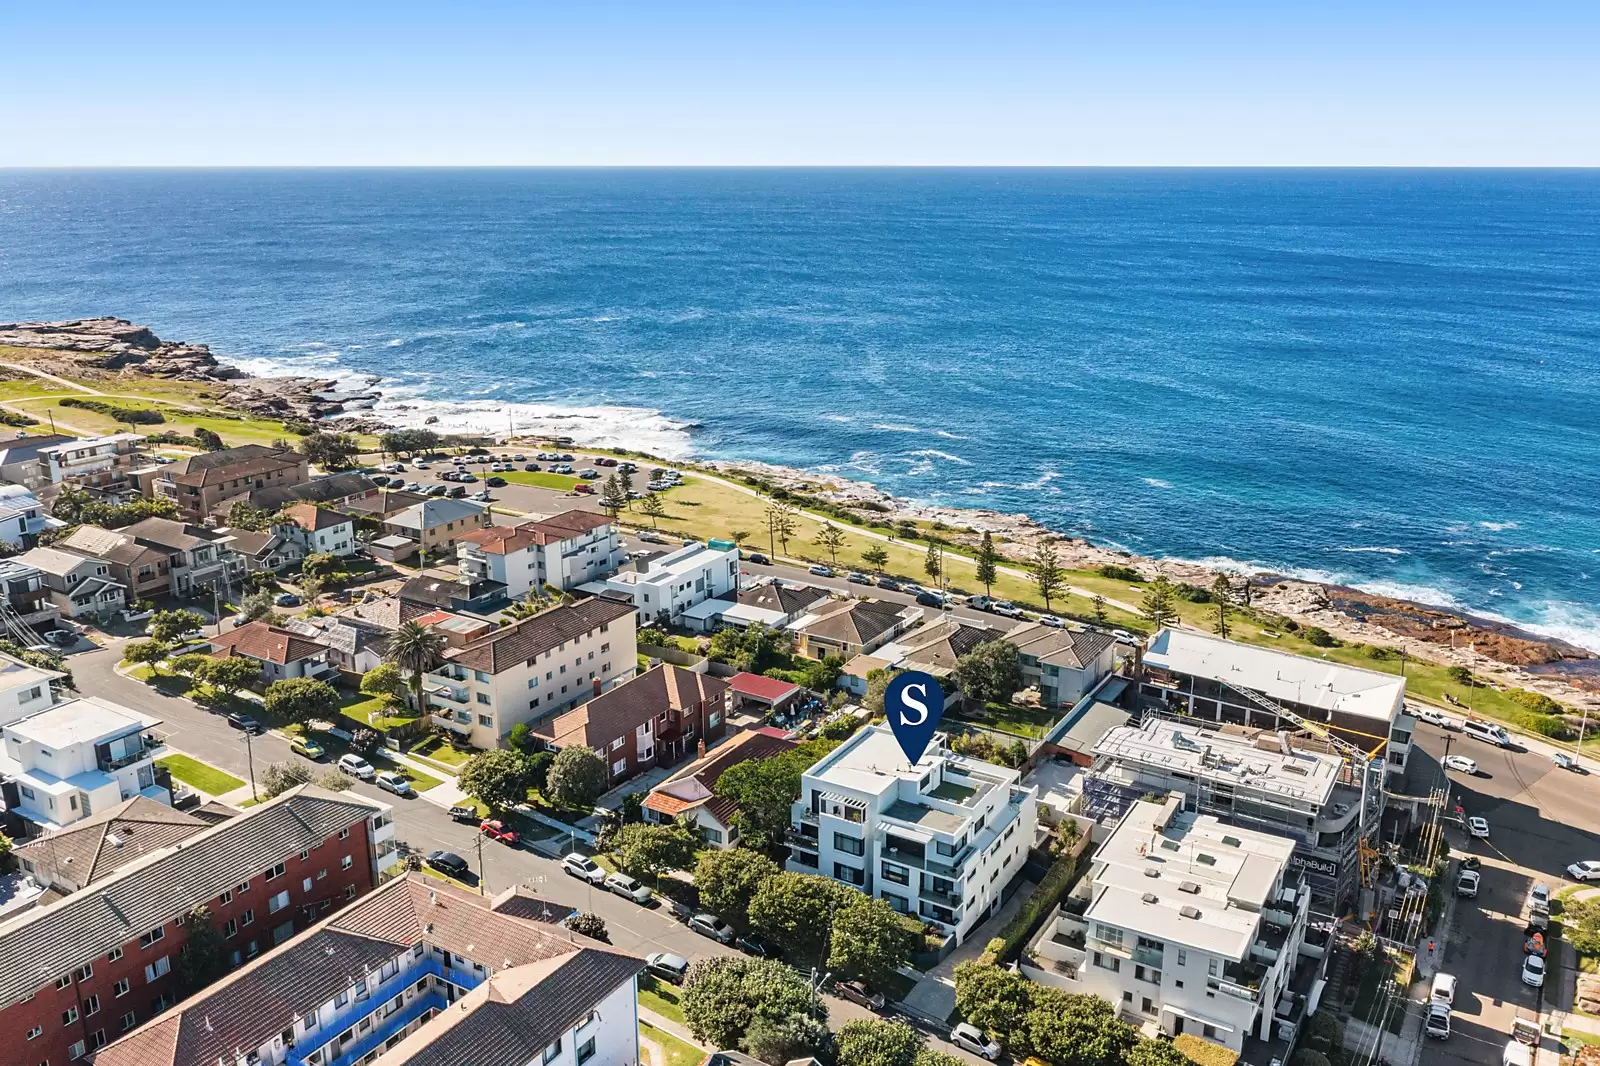 Photo #6: 9/9-11 Beaumond Avenue, Maroubra - Sold by Sydney Sotheby's International Realty